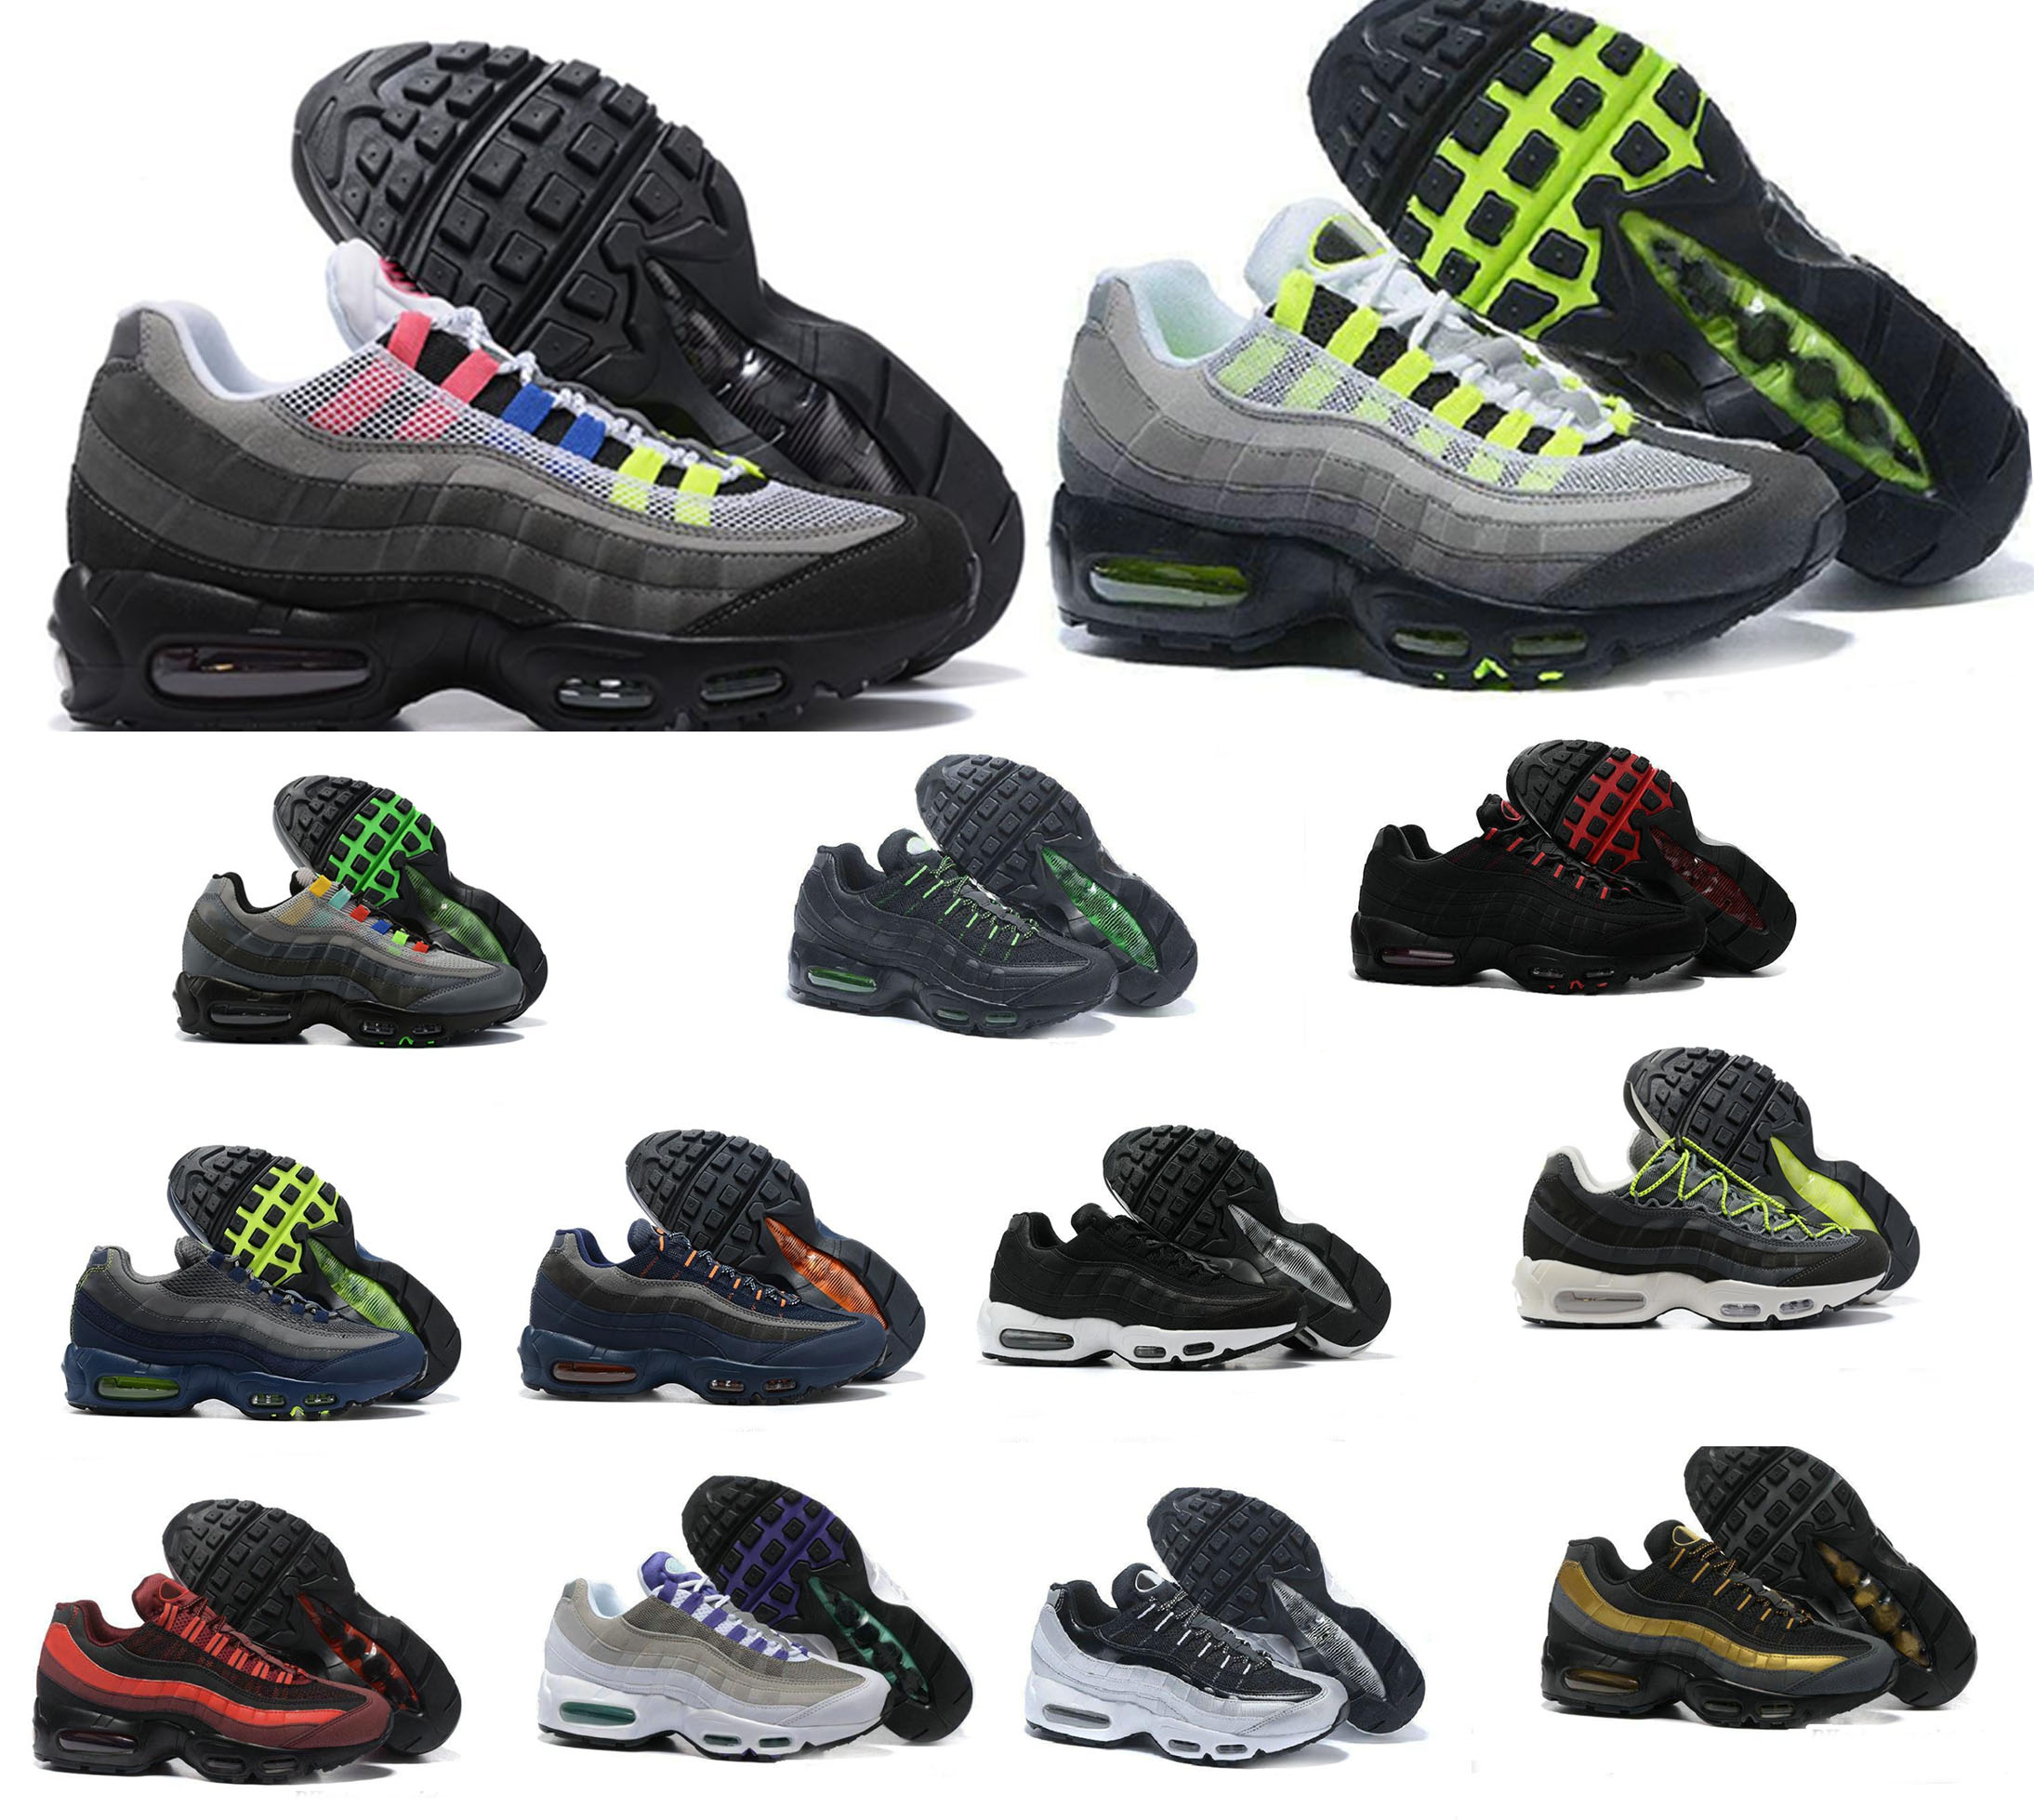 

95 Running Shoes 95S Low trainers Men Women Sports 2022 Training sneakers 2022 Classic walking sportswear popular boot for gym 20Th Anniversary Grape Safari, Pay for box